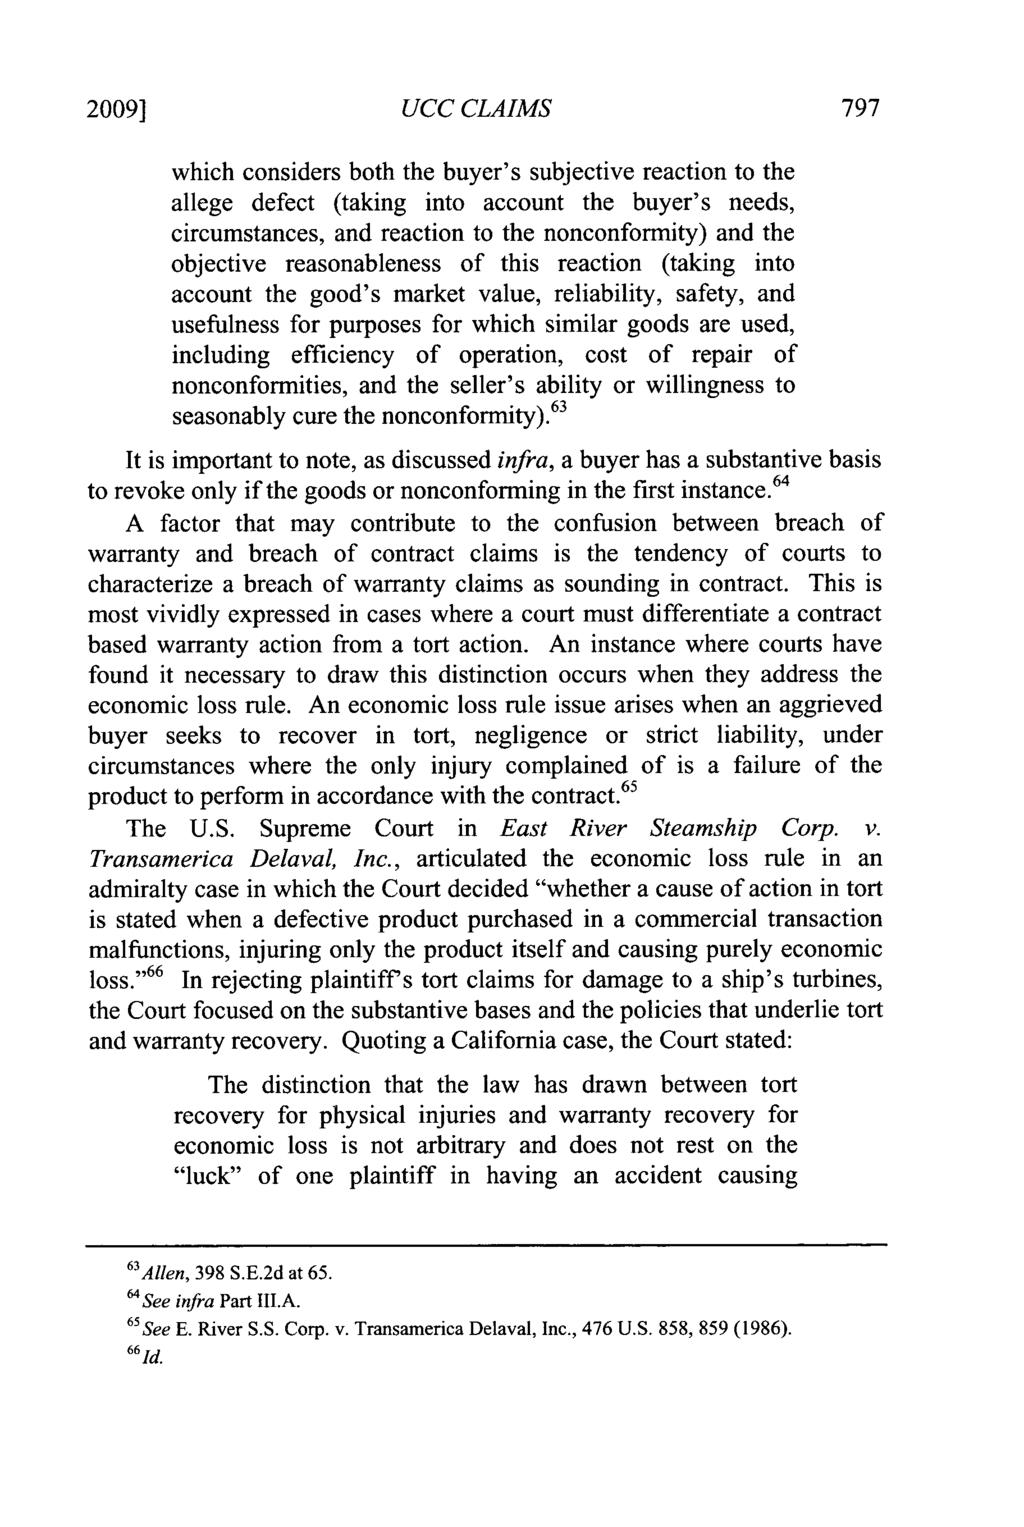 2009] UCC CLAIMS which considers both the buyer's subjective reaction to the allege defect (taking into account the buyer's needs, circumstances, and reaction to the nonconformity) and the objective